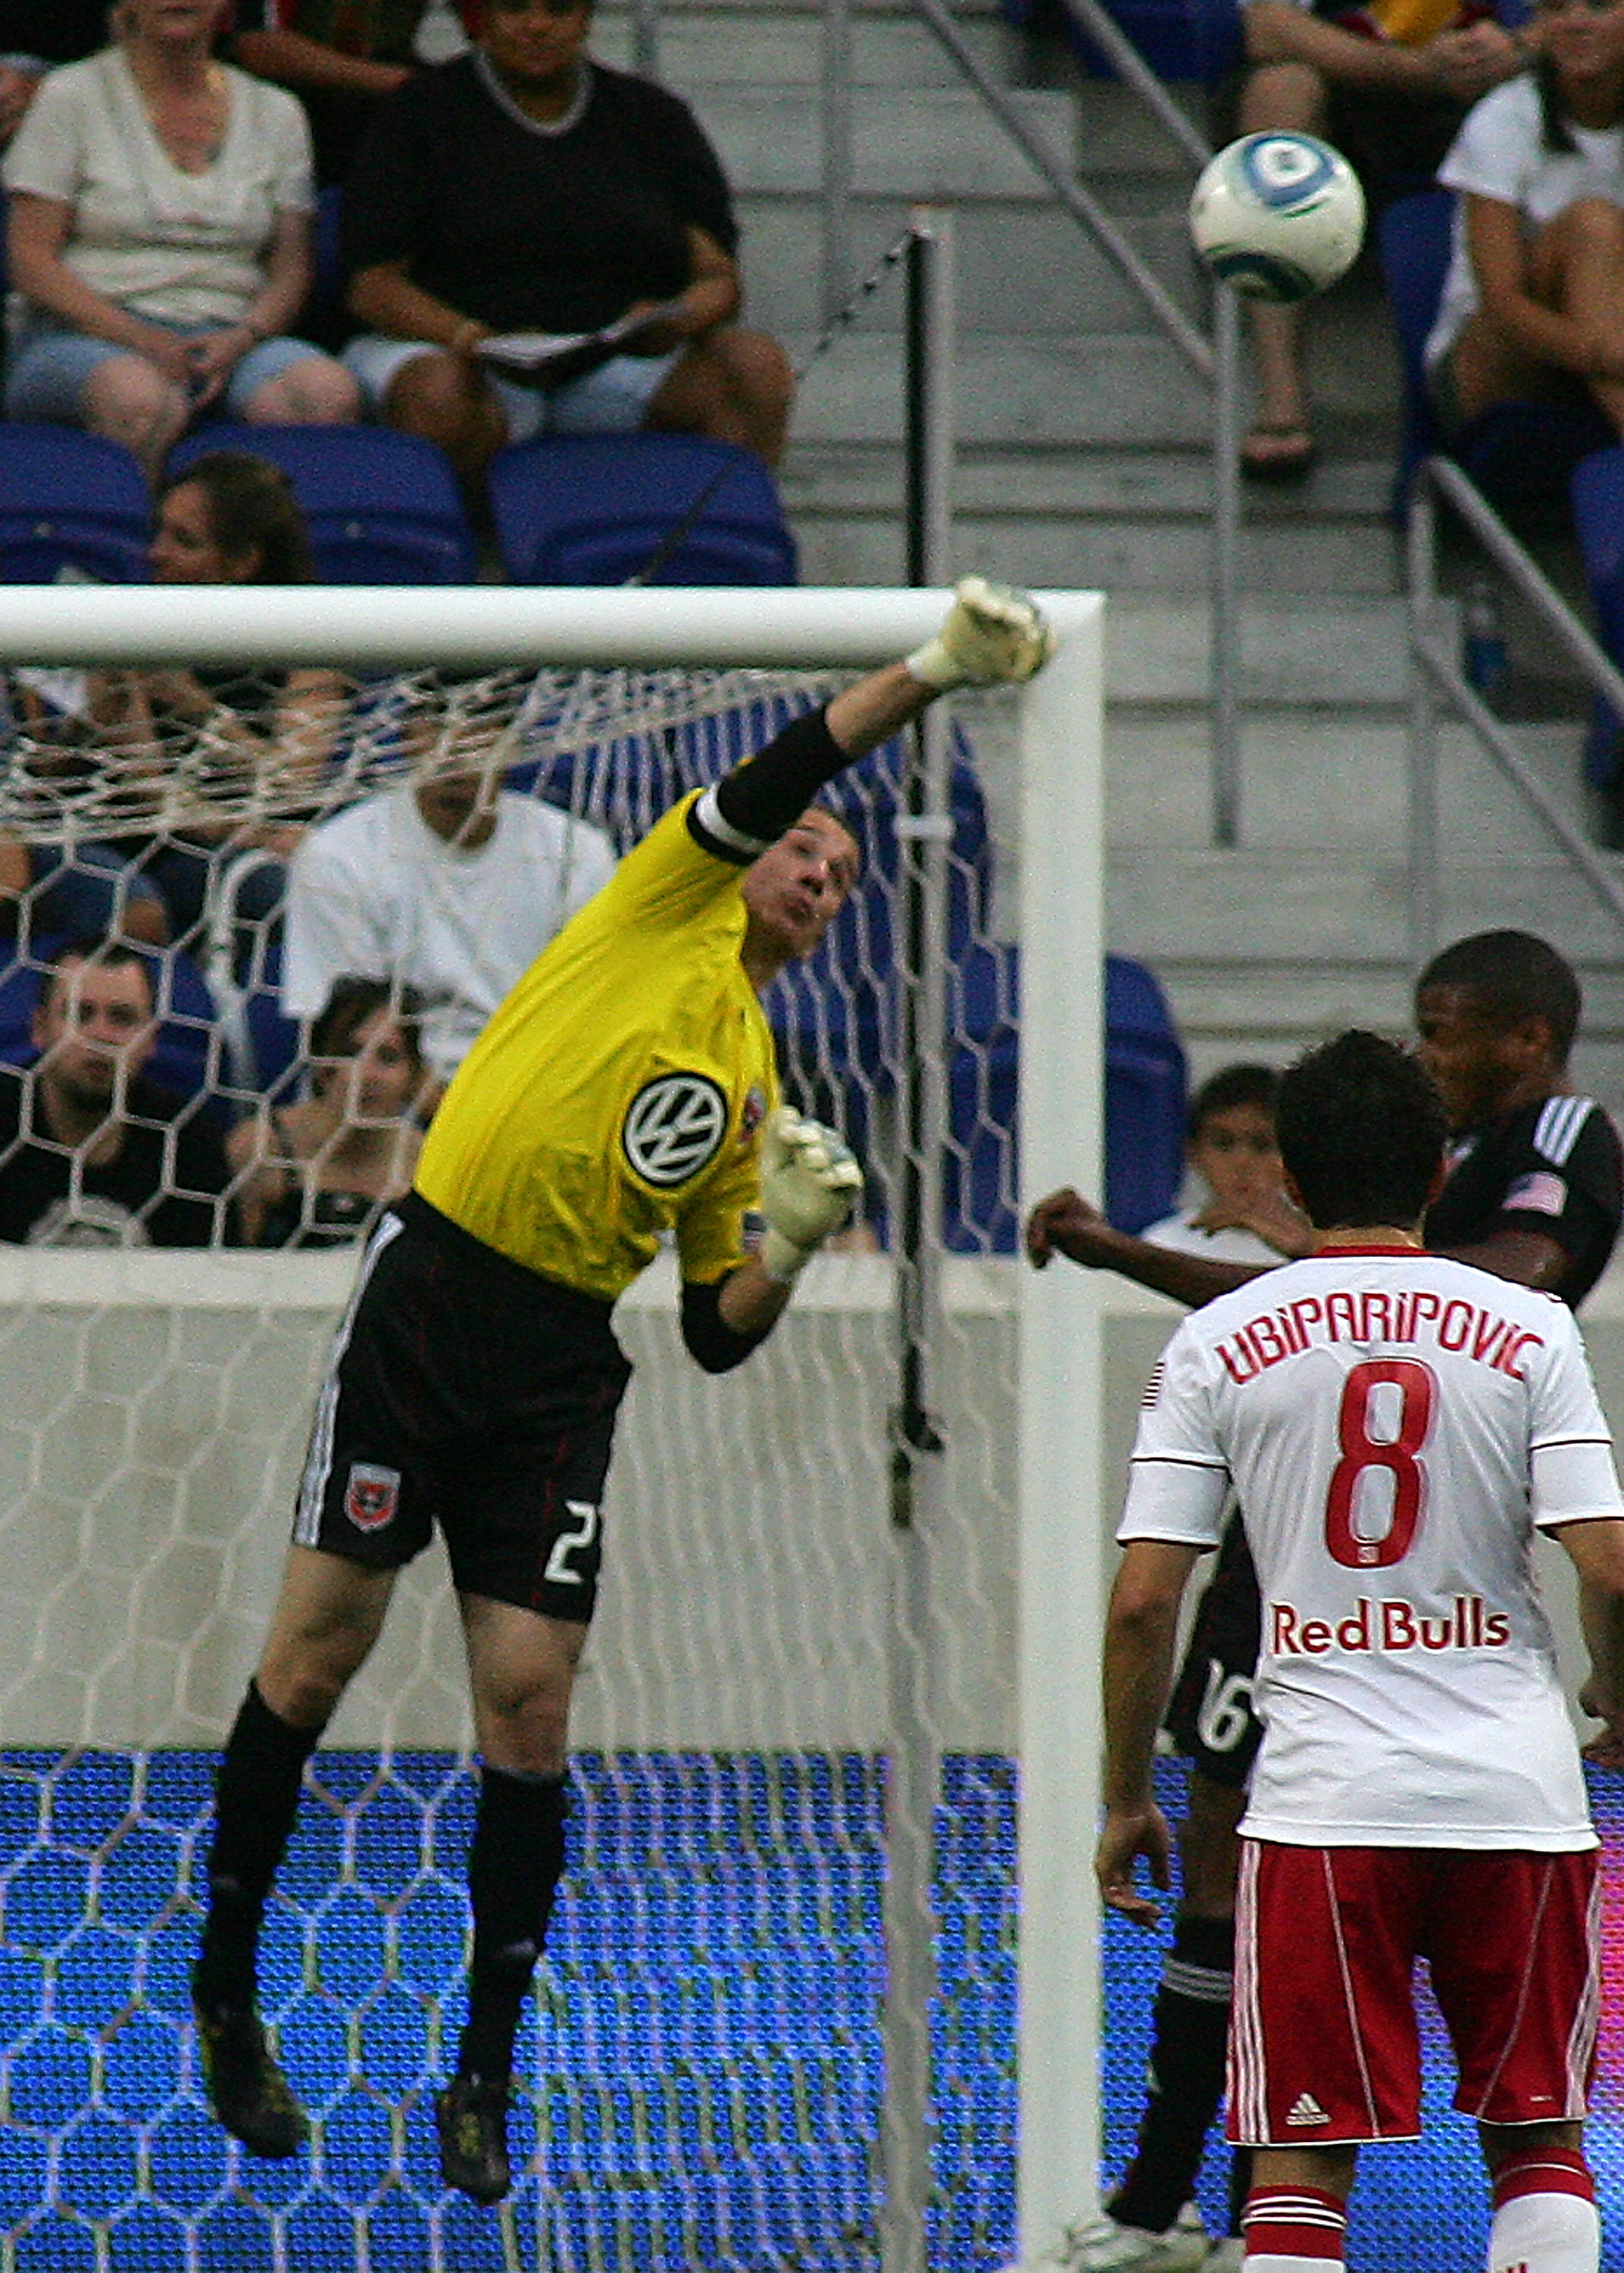 HARRISON, NJ - JULY 10: Golakeeper Troy Perkins #23 of D.C. United punches the ball out of his zone against the New York Red Bulls during their game at Red Bull Arena on July 10, 2010 in Harrison, New Jersey.  (Photo by Andy Marlin/Getty Images)